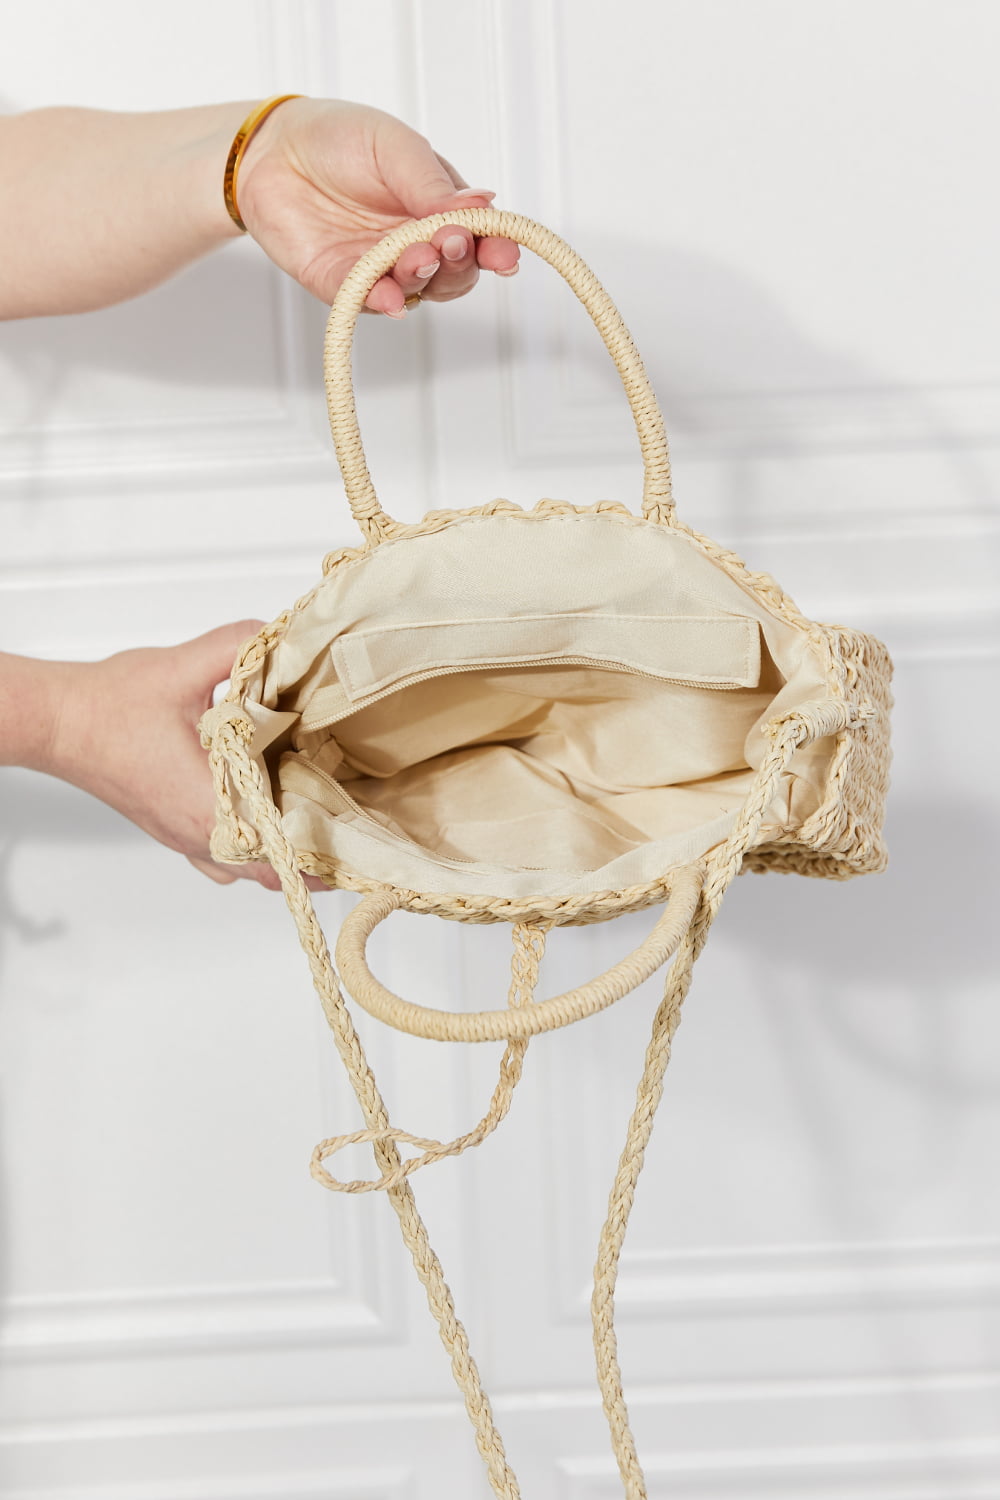 Justin Taylor Feeling Cute Rounded Rattan Handbag in Ivory  Sunset and Swim   